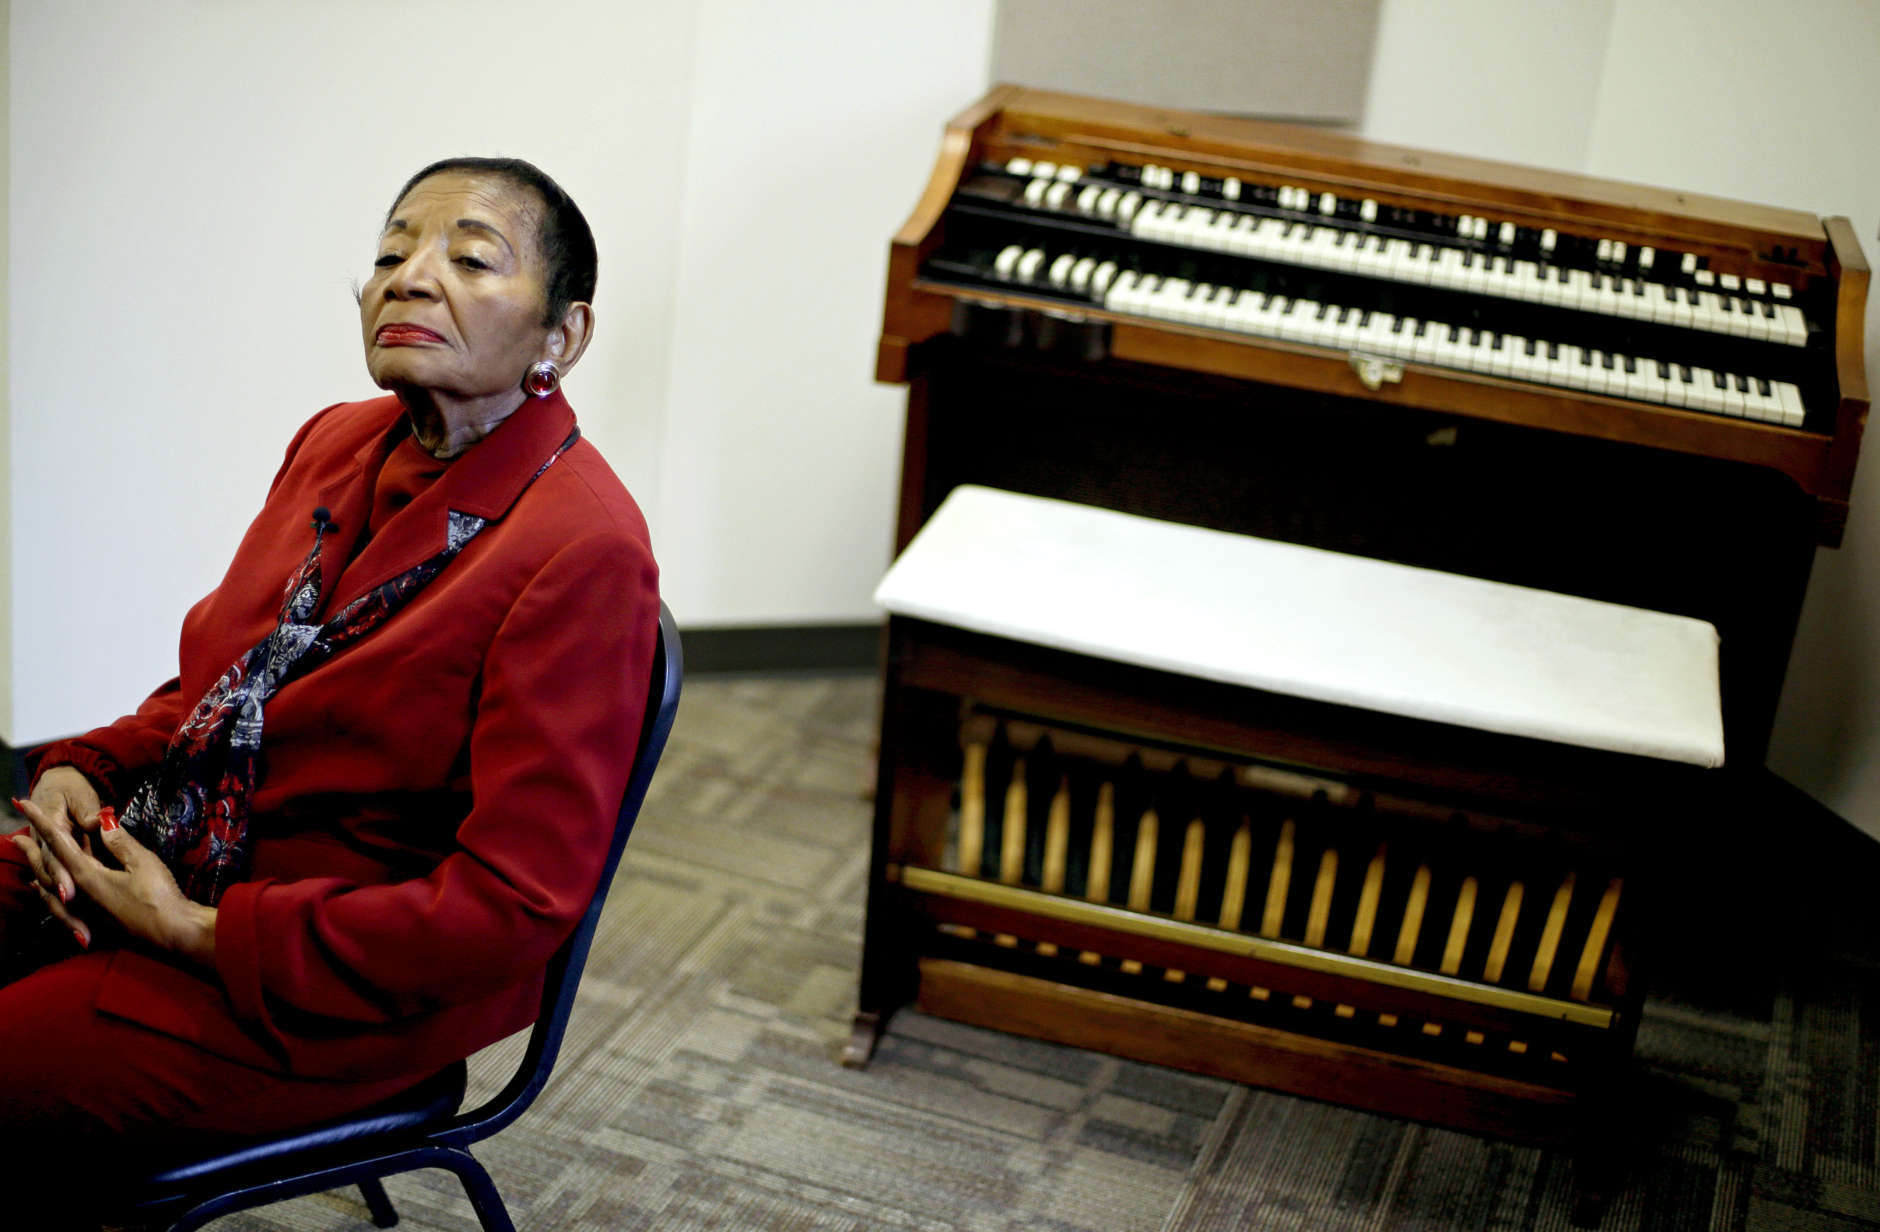 In this Wednesday, Nov. 14, 2012 photo, Christine King Farris, the sister to Rev. Martin Luther King Jr., and daughter of Martin Luther King Sr., sits next to the organ played by her mother, Alberta Christine Williams King, at which she was fatally shot while playing during a church service in 1974, as the organ sits on display in the new Martin Luther King, Sr. Community Resources Complex in Atlanta. The new Atlanta community center intended to help low-income residents become more financially secure has been envisioned as a living legacy for the Rev. Martin Luther King Sr., father of the civil rights icon. (AP Photo/David Goldman)